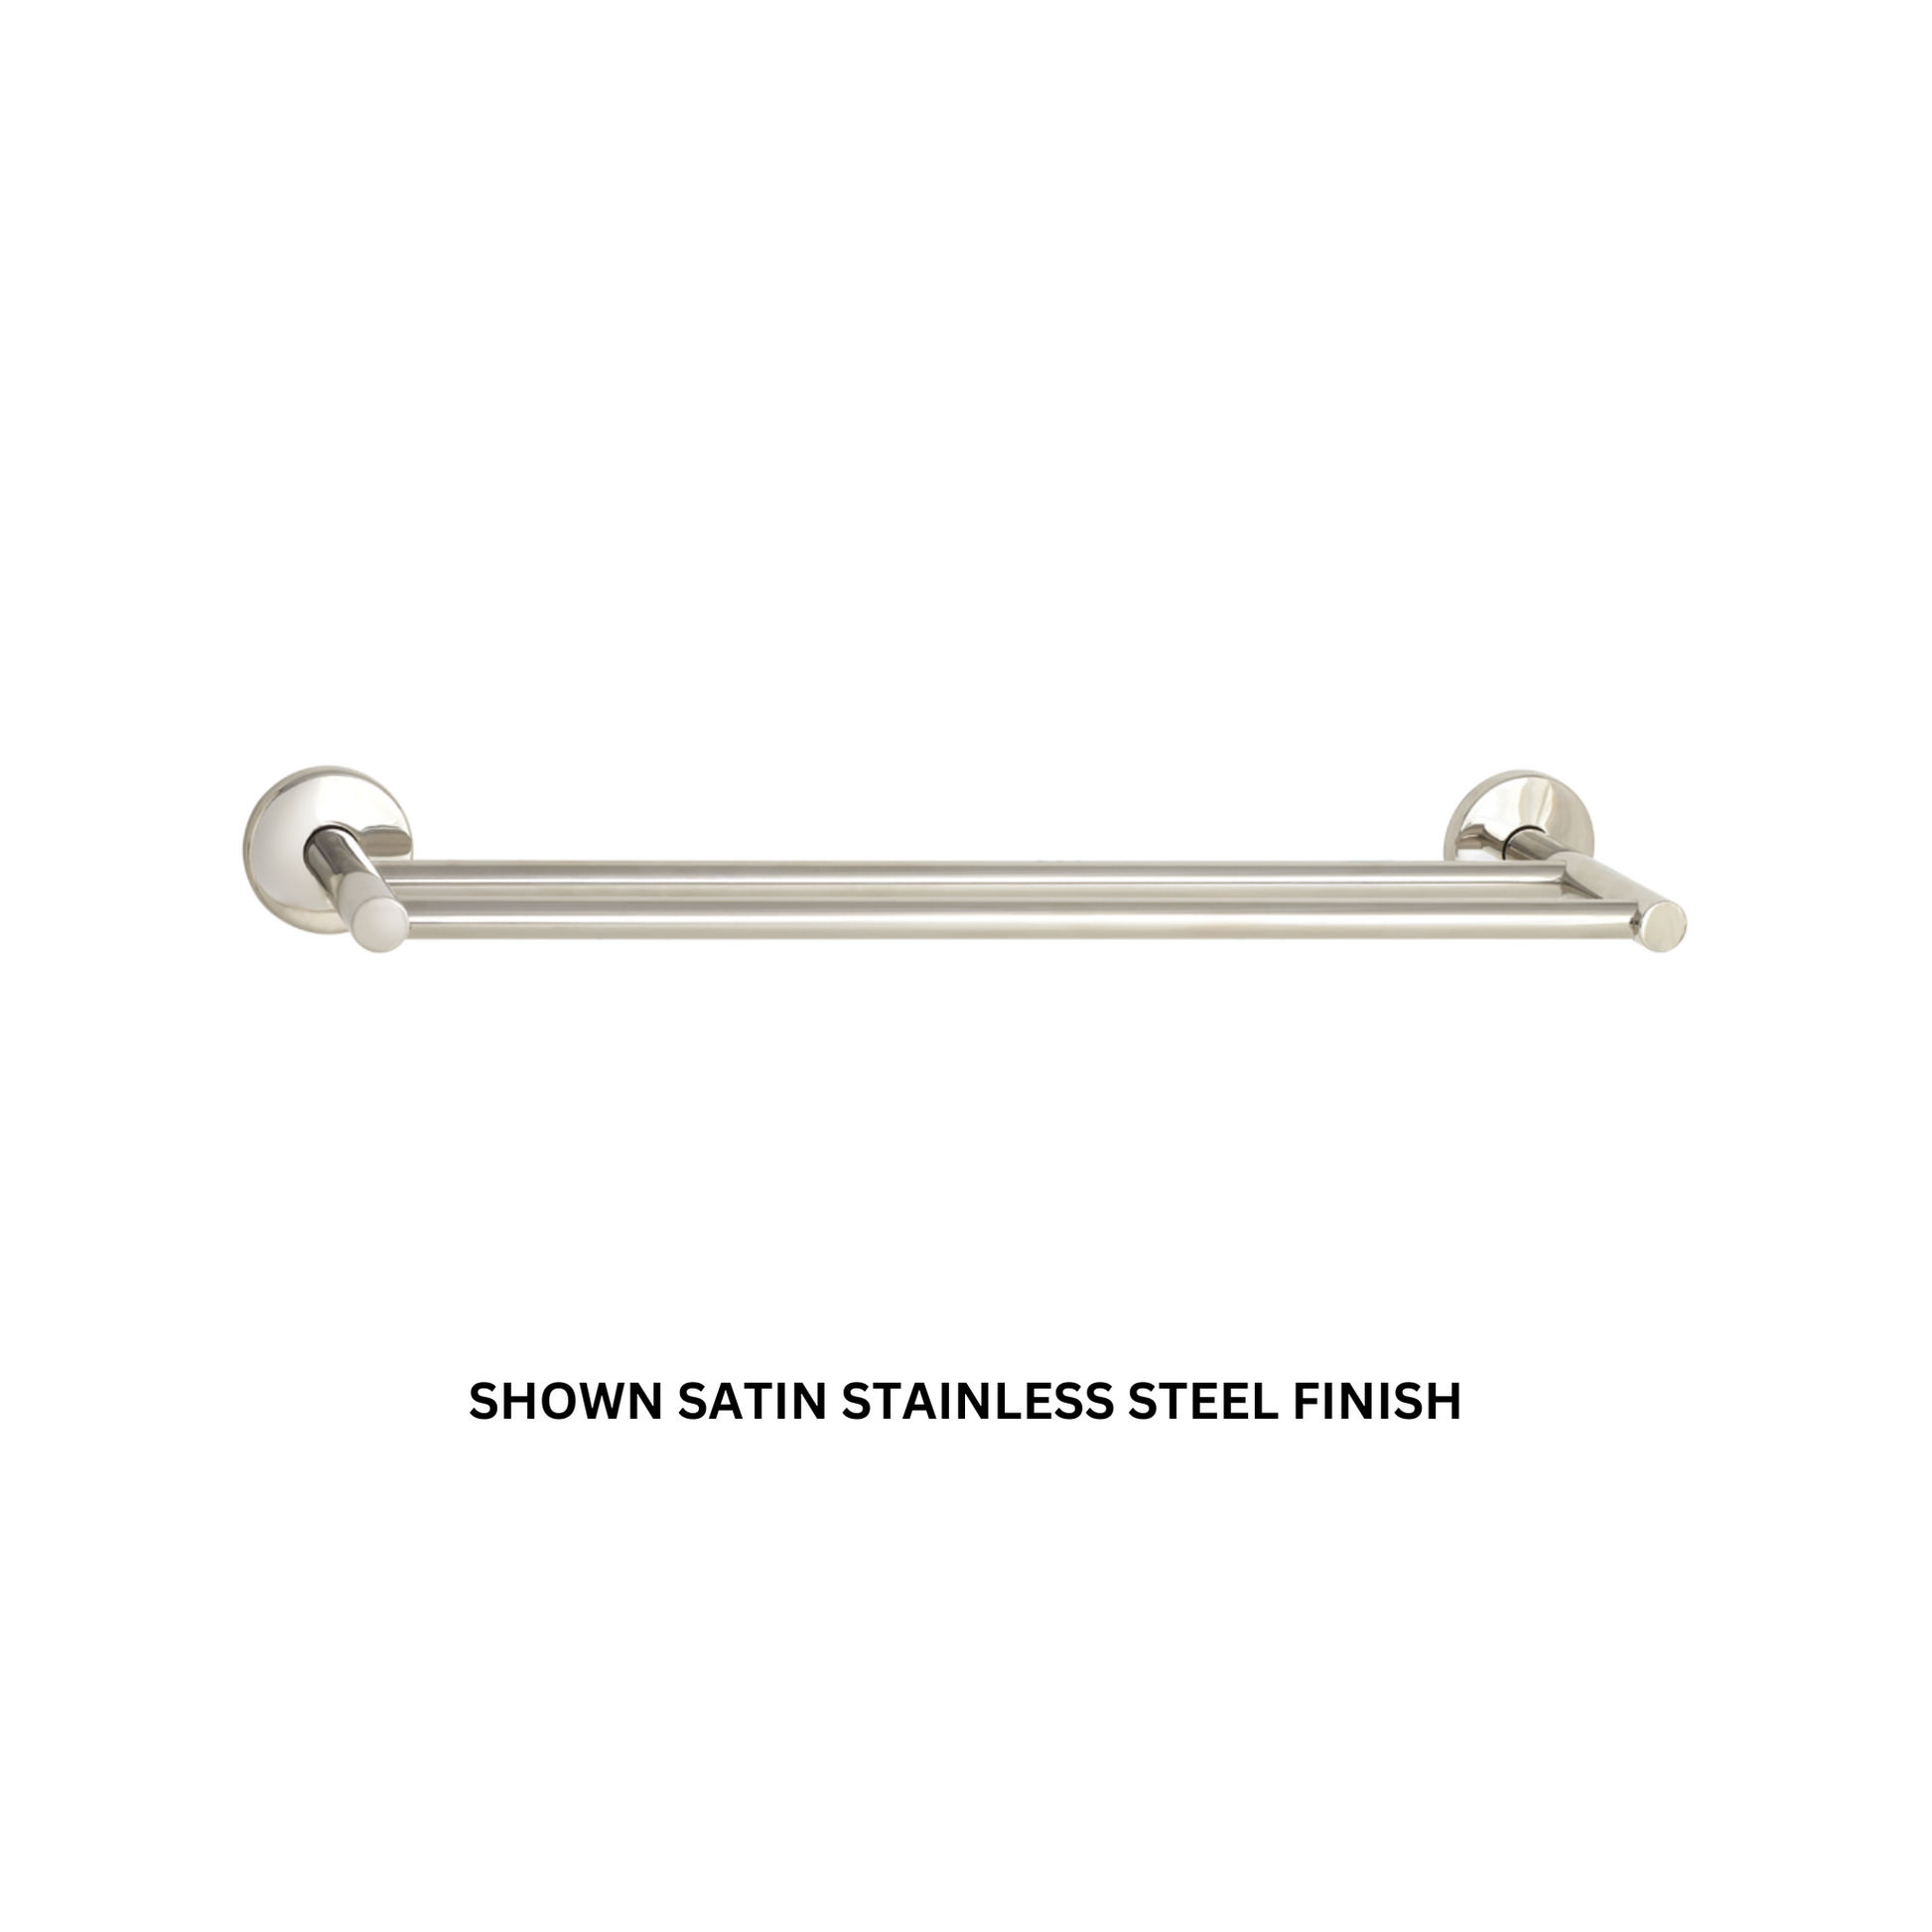 Seachrome Conorado Series 24" Satin Nickel Powder Coat Concealed Mounting Flange Double Towel Bar